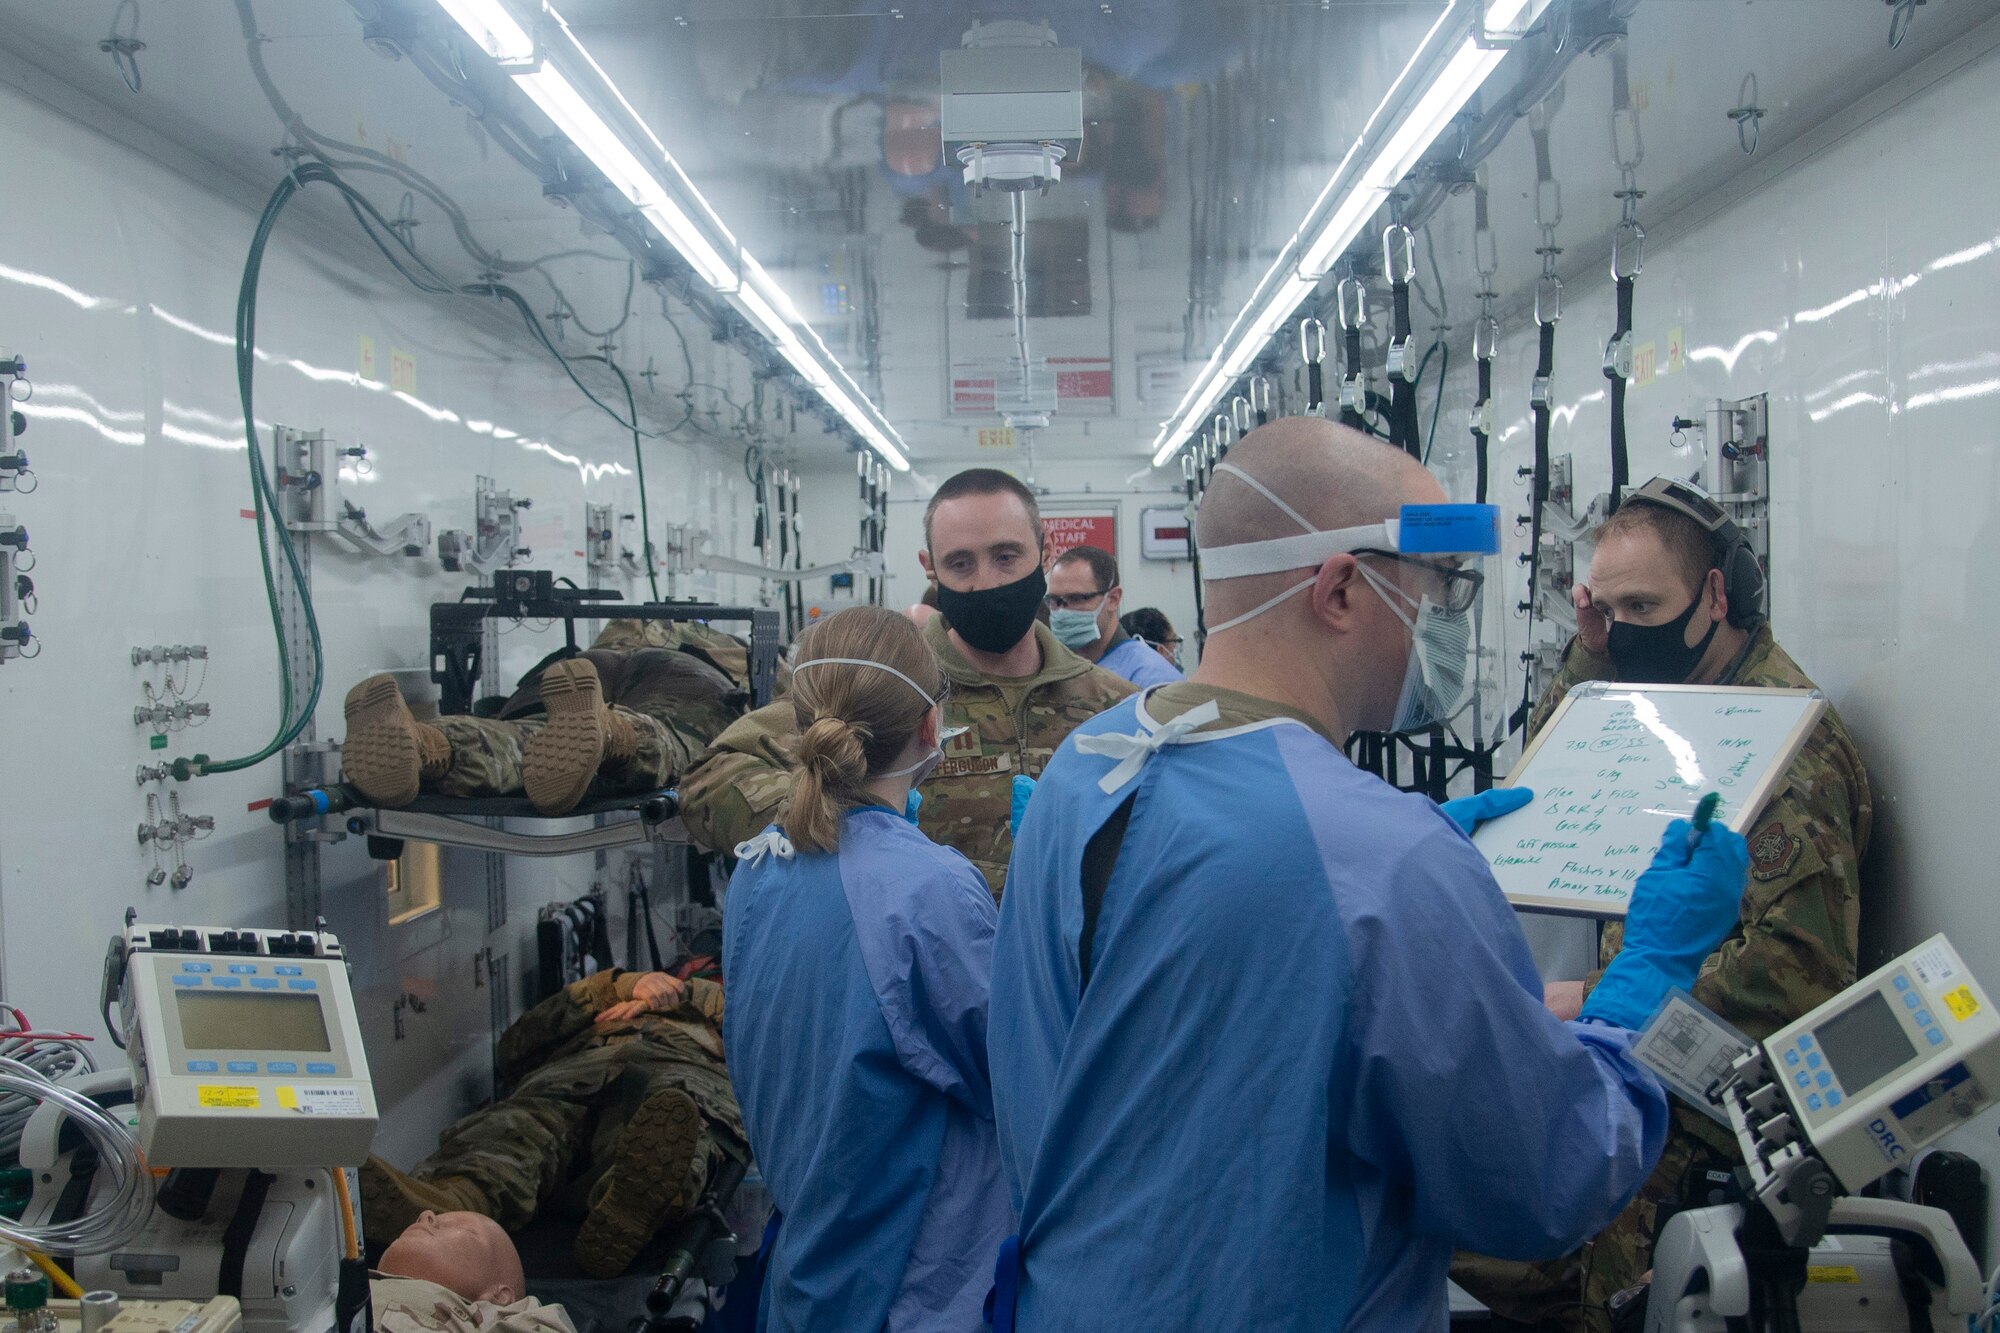 U.S. Air Force Airmen assigned to the 10th Expeditionary Aeromedical Evacuation Flight write notes about patient care and speak with their instructors while inside a Negatively Pressurized Conex during training at Ramstein Air Base, Germany, Jan. 30, 2021.